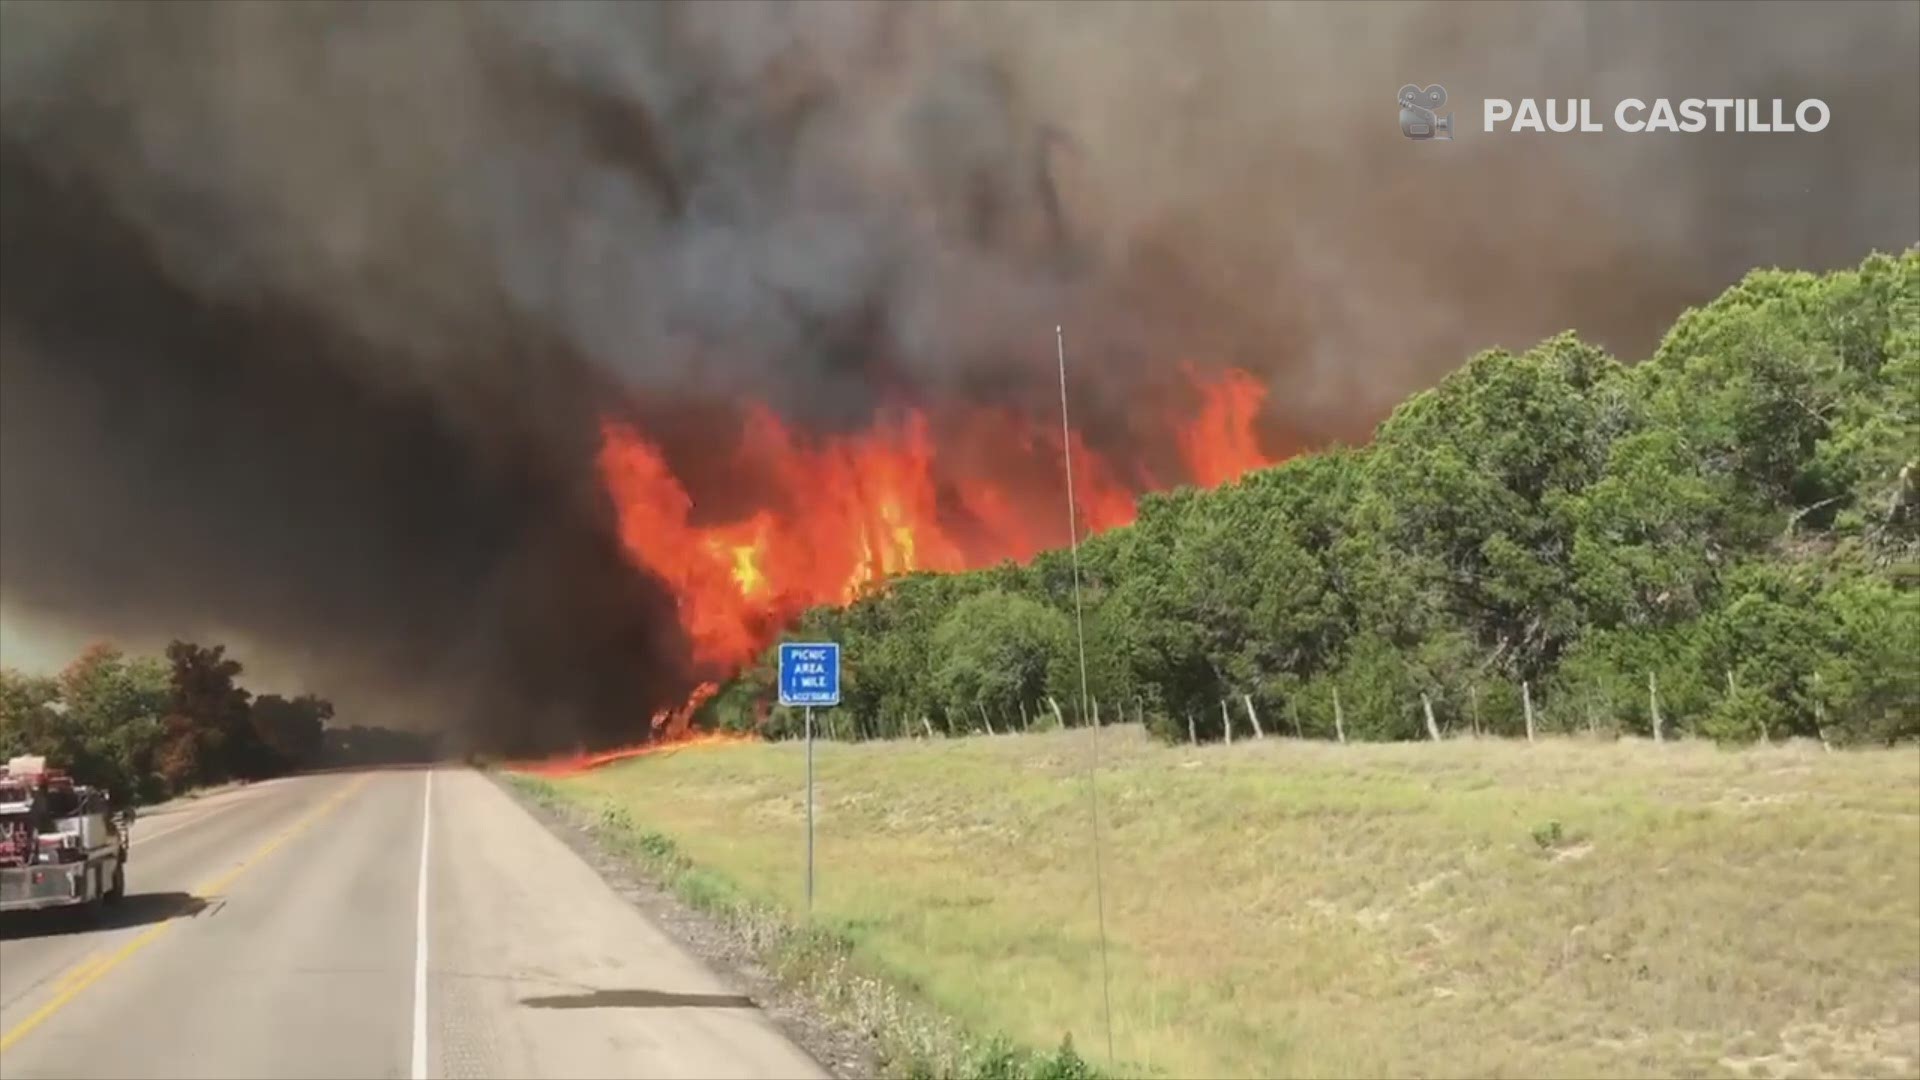 A wildfire burns trees and brush west of Palo Pinto. The fire since grew to more than 1,500 acres. Video: Paul Castillo